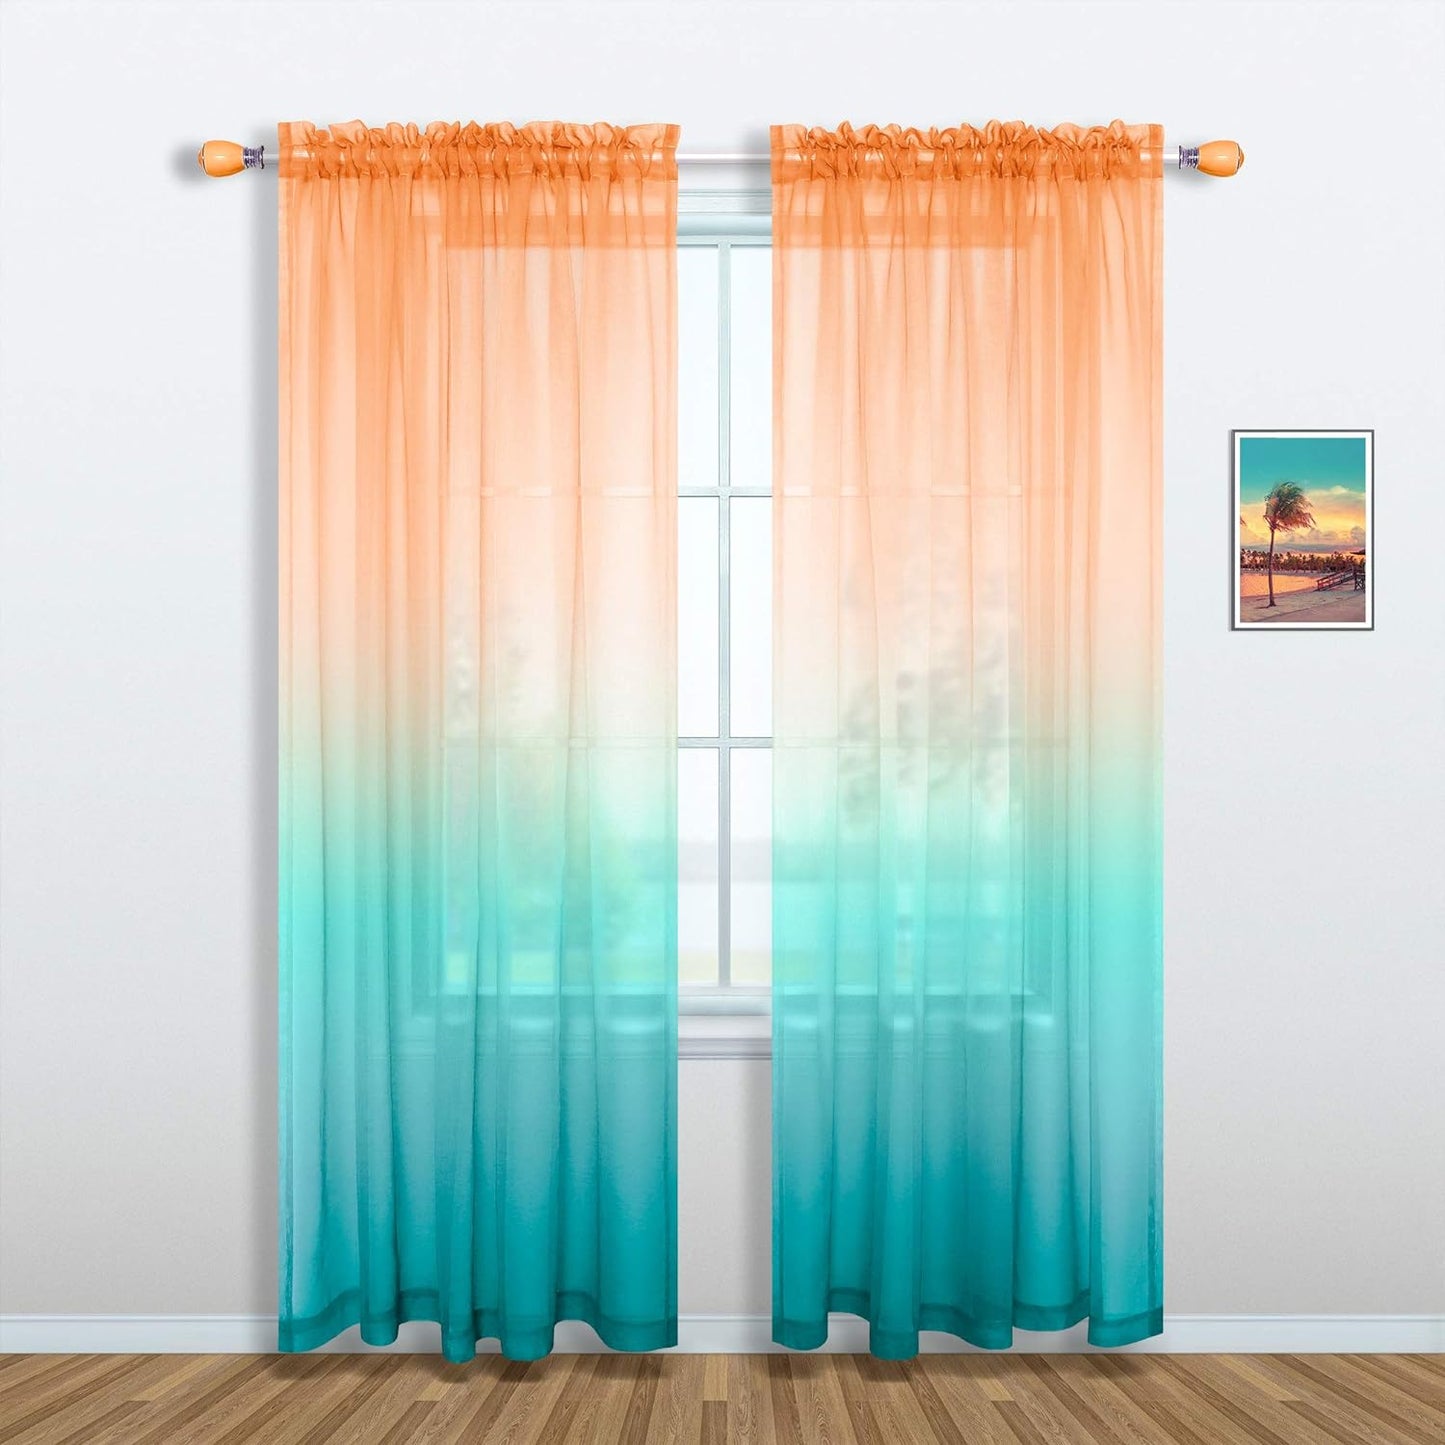 Pink and Purple Curtains for Girls Bedroom Decor Set 1 Single Panel Pocket Window Voile Pastel Sheer Ombre Rainbow Curtain for Kid Room Decoration Teen Princess 63 Inch Length Gradient Lilac Lavender  MRS.NATURALL TEXTILE Orange And Green 52X84 